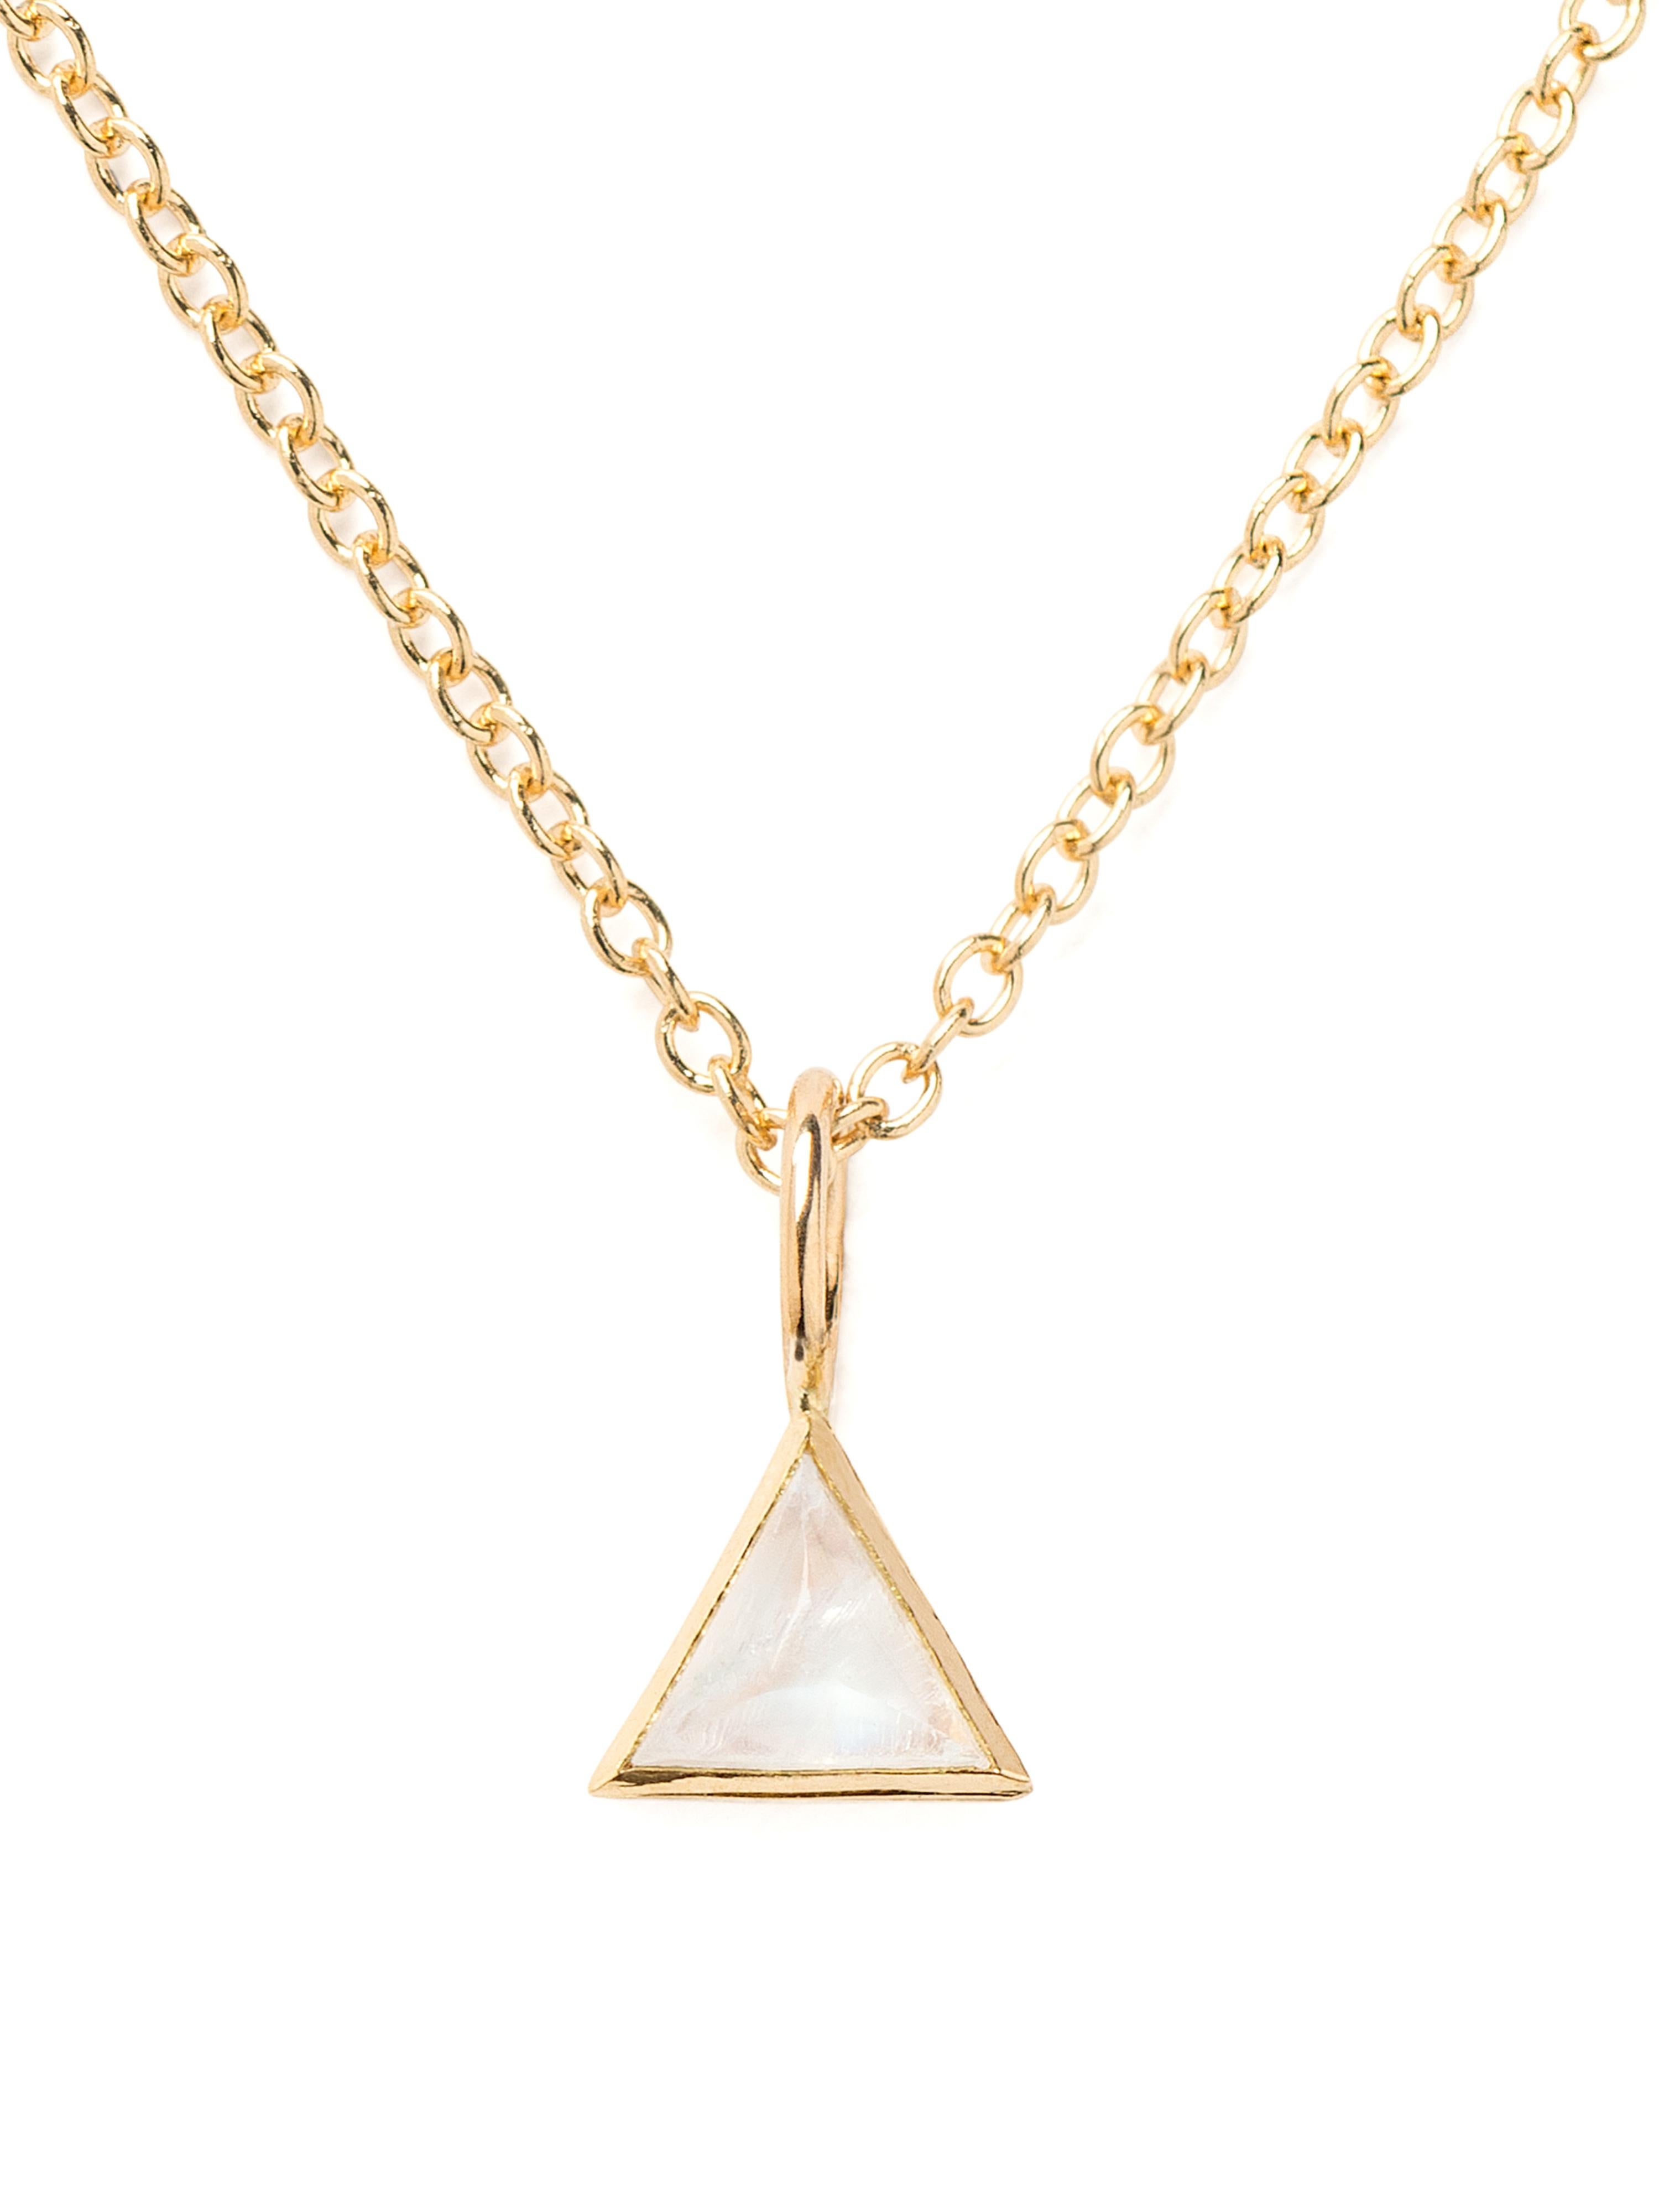 Size of the pattern: 6.5x6.5 mm
Stone: Moonstone - 0.5 carat
Shape: triangle
Average weight of gold (750/1000) : 0.3 gram
Chain sold separately

*Please note that the weight in carats, the number of stones and the dimensions of the product are given